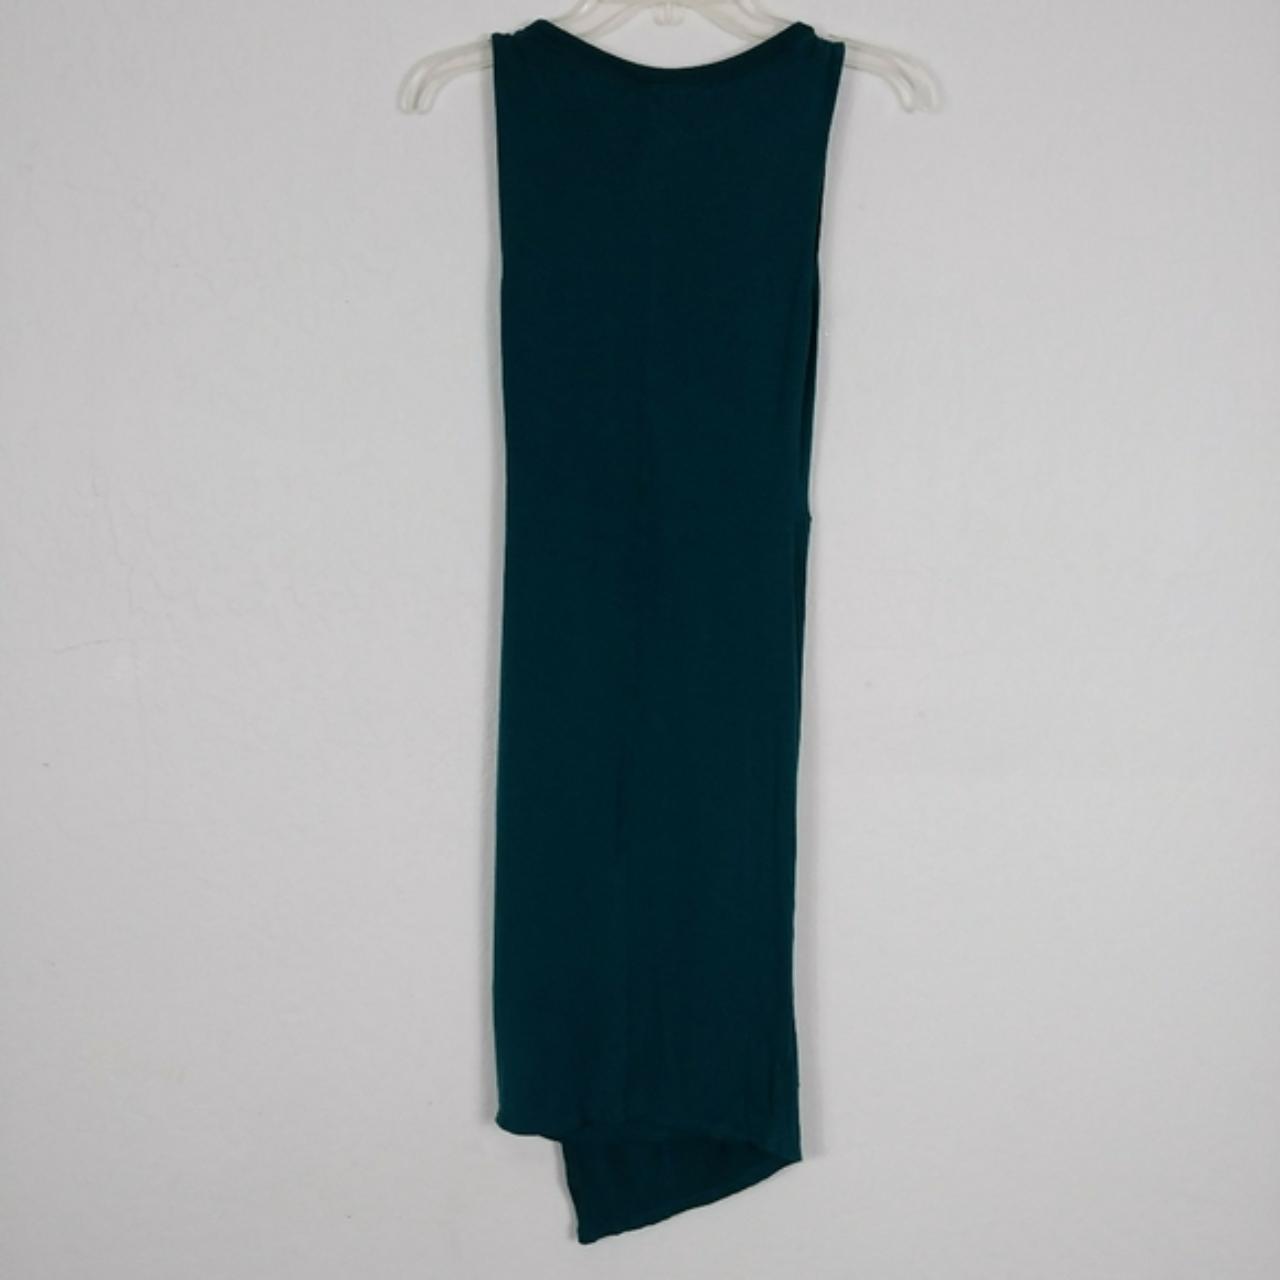 Forever 21 Women's Blue and Green Dress (3)